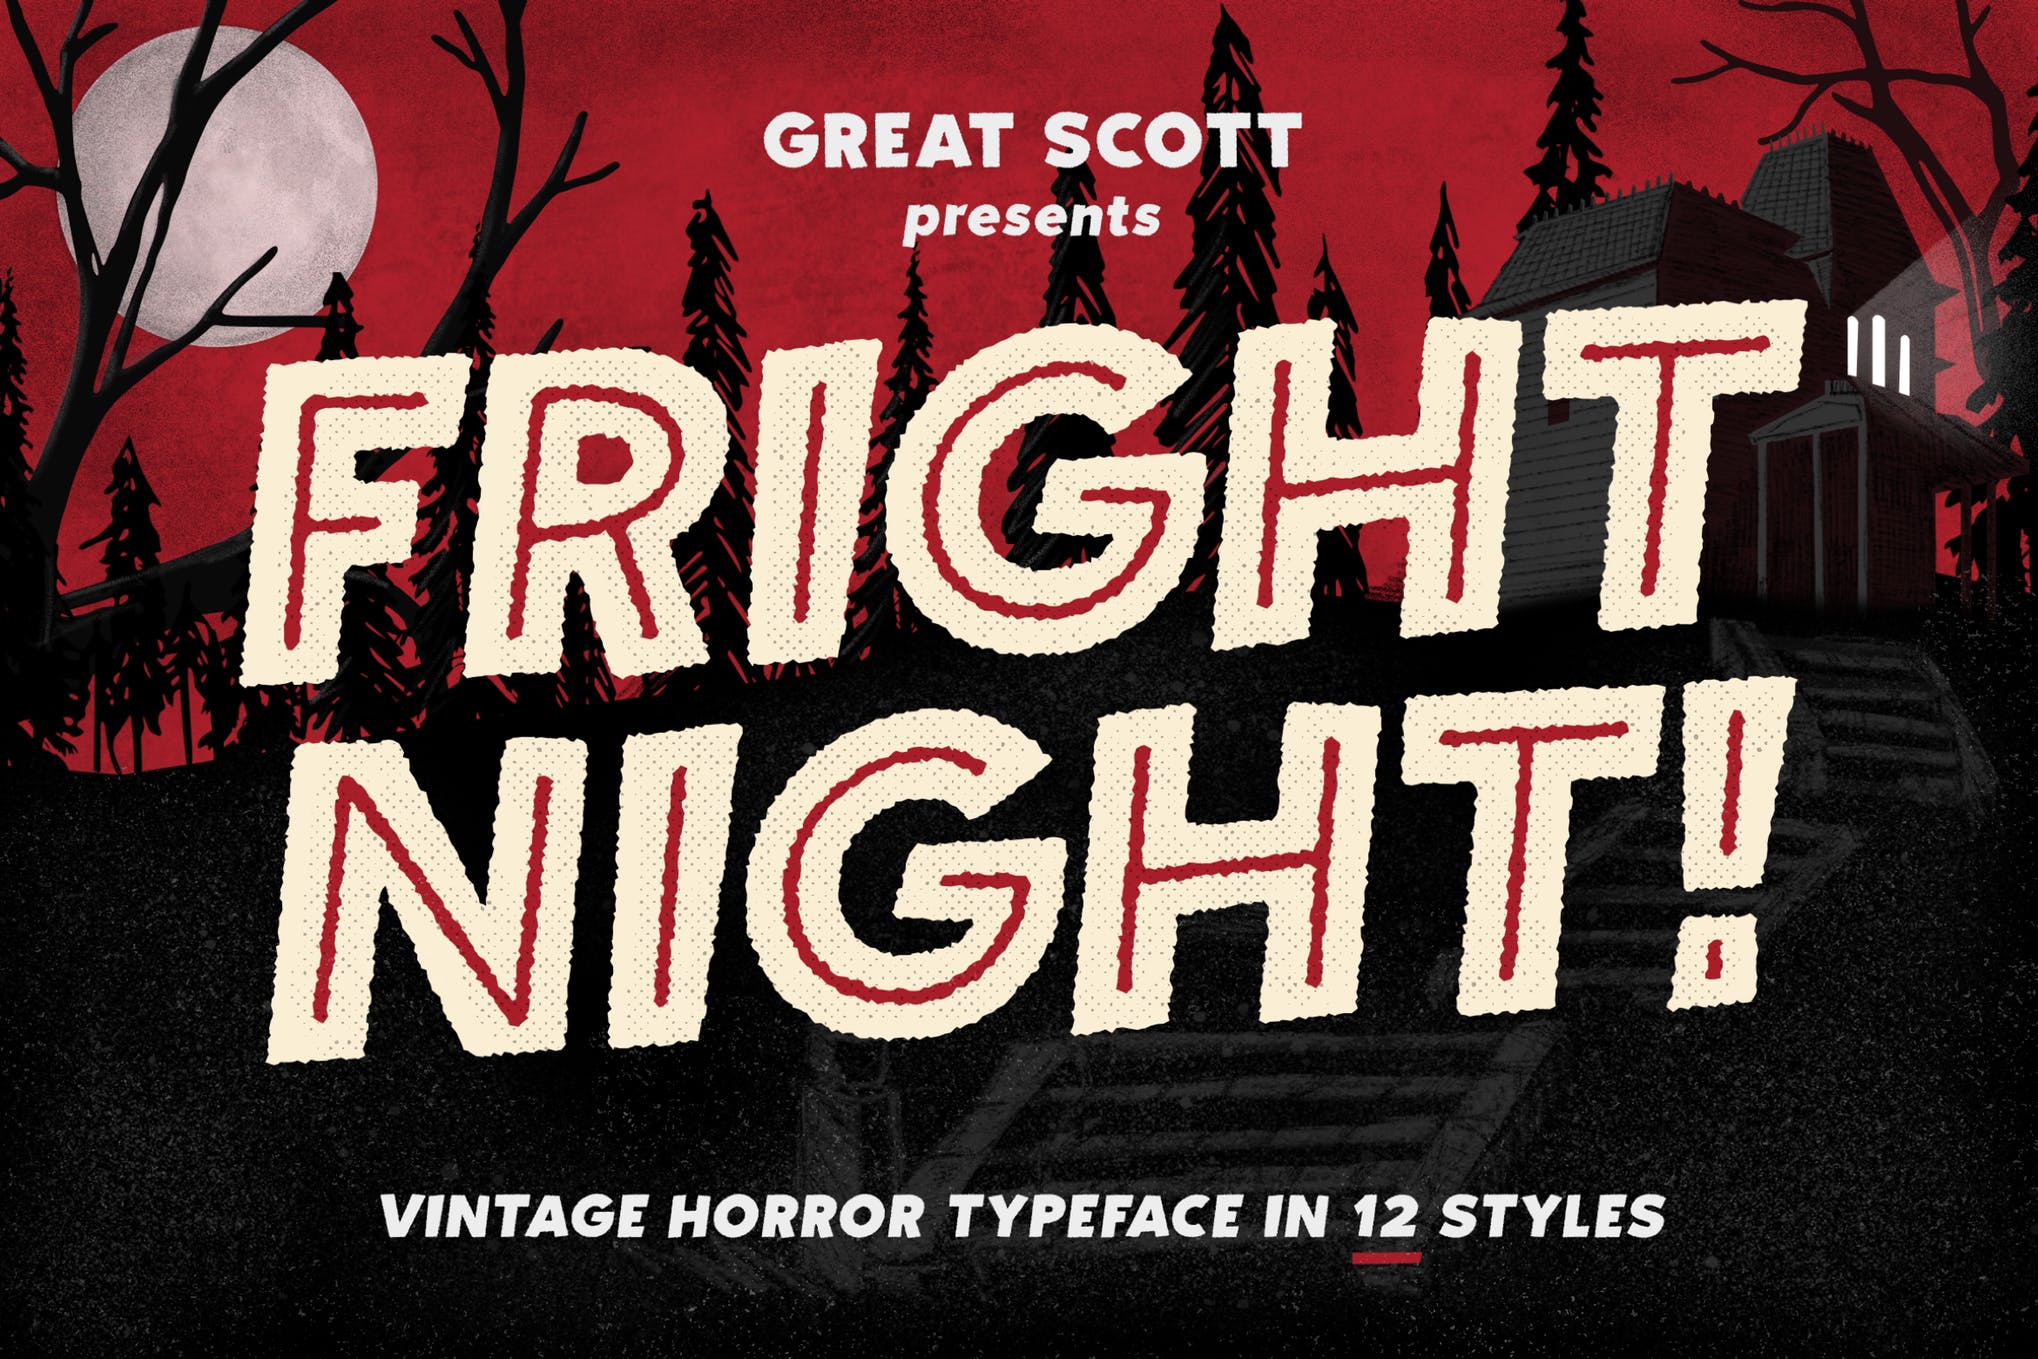 Great Scott presents Fright Night Vintage Horror Typeface in 12 Styles - Halloween Fonts for 2019